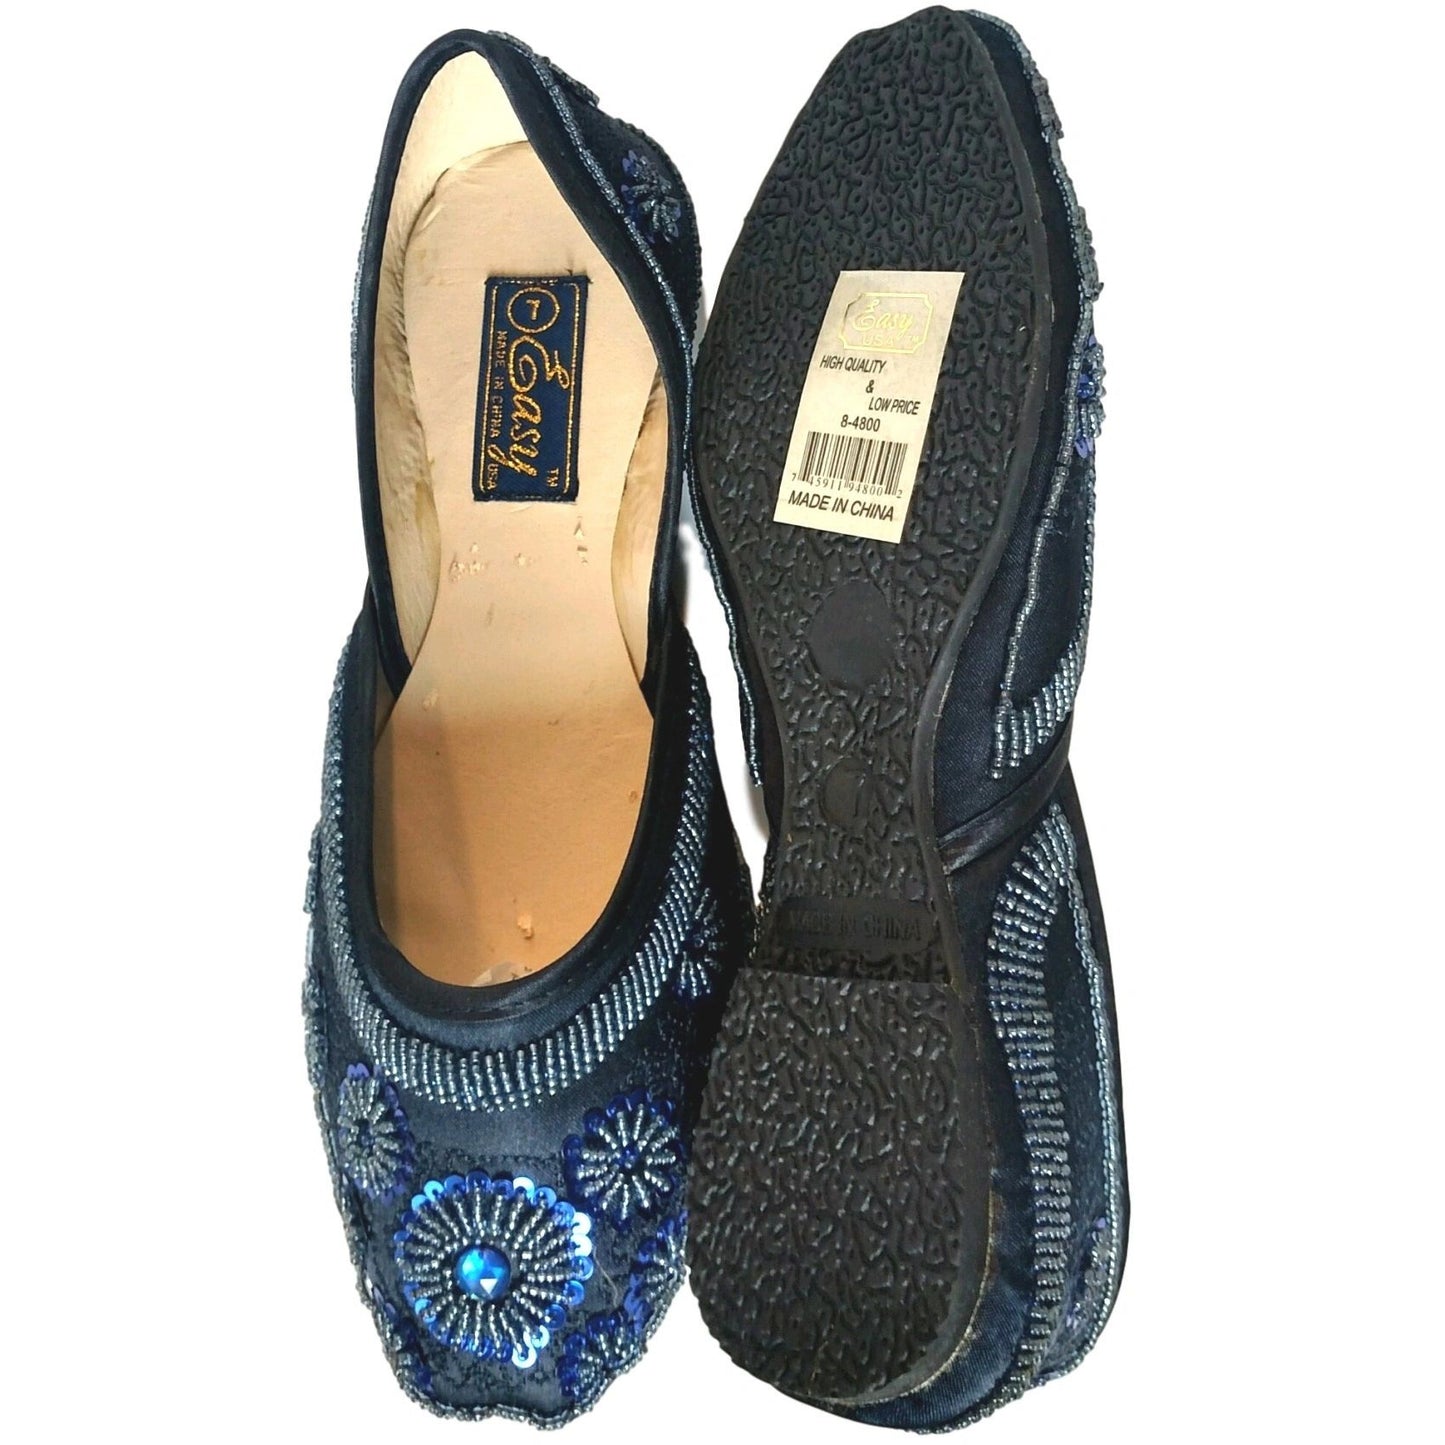 Blue Sequin and Beads Jutti/Khussa Flat Shoes